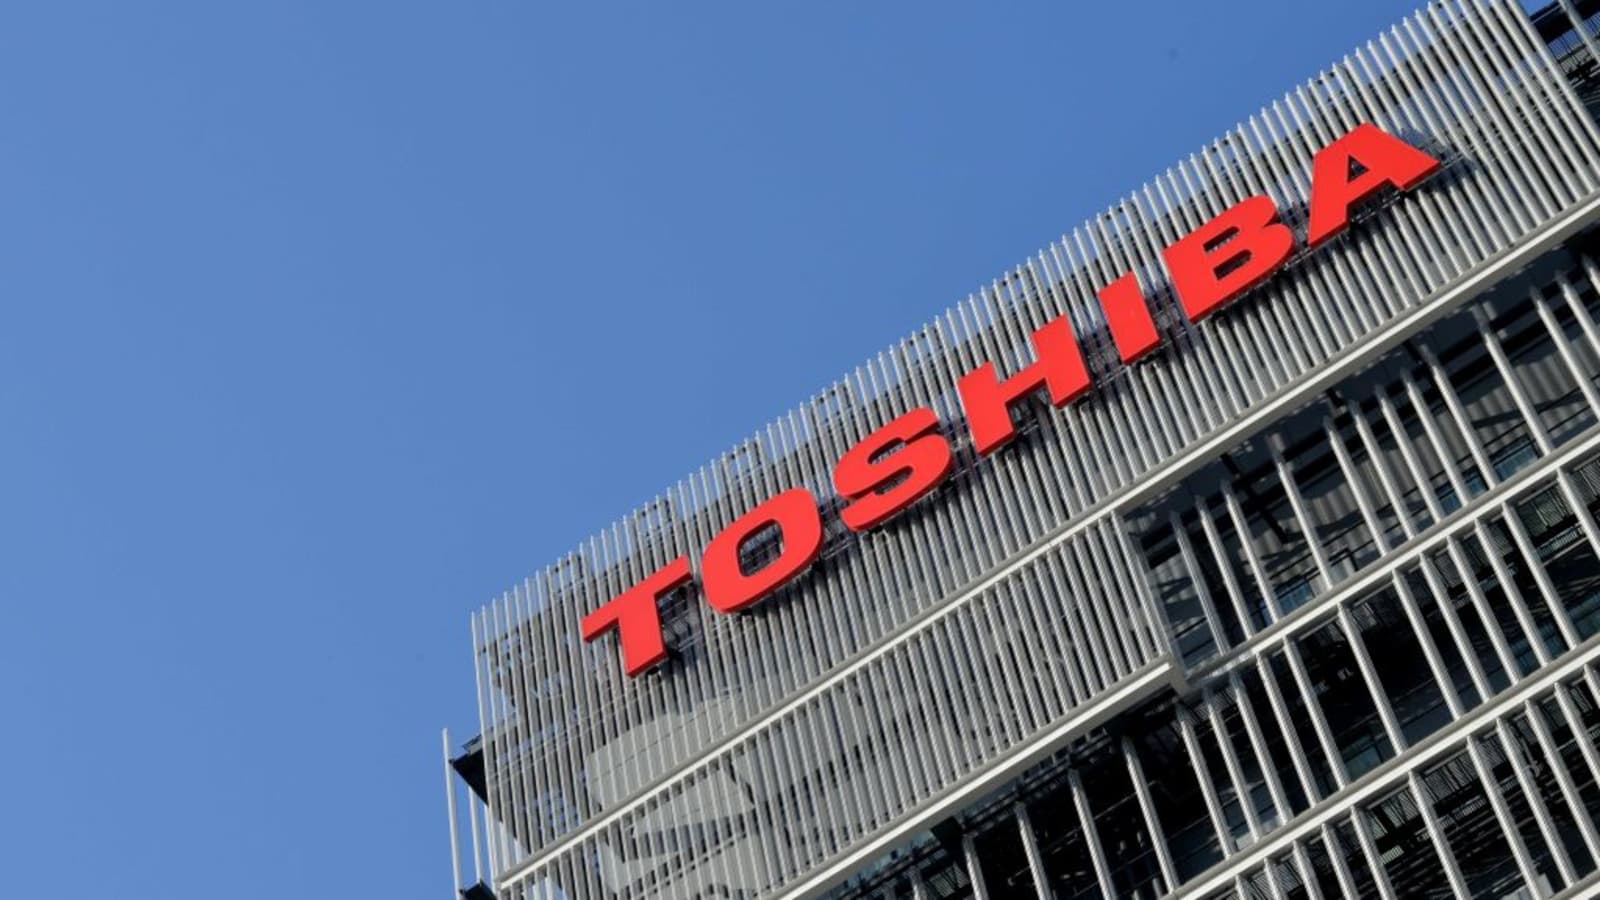 Toshiba to sell chip business to Bain-led group for $18 billion